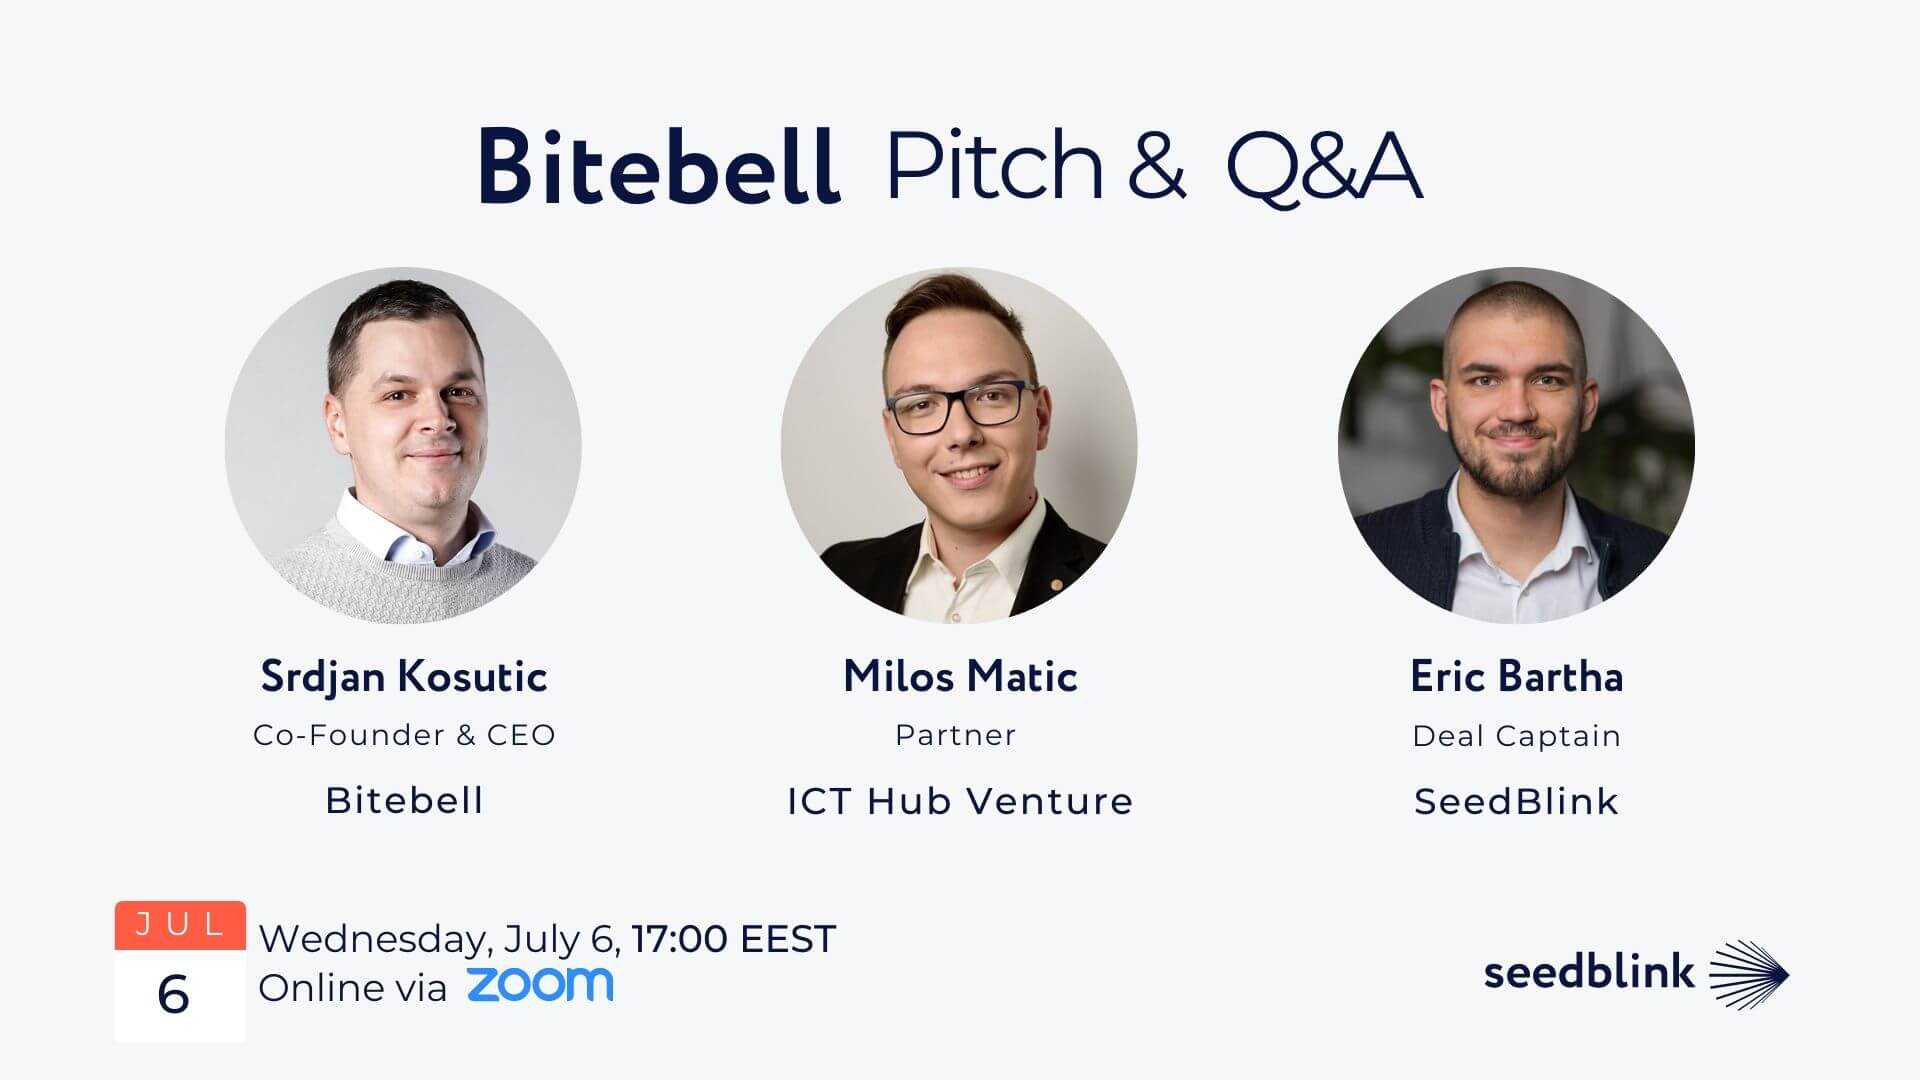 bitebell-pitch-qa-seedblink-investment-opportunity-saas-qcommerce-1-